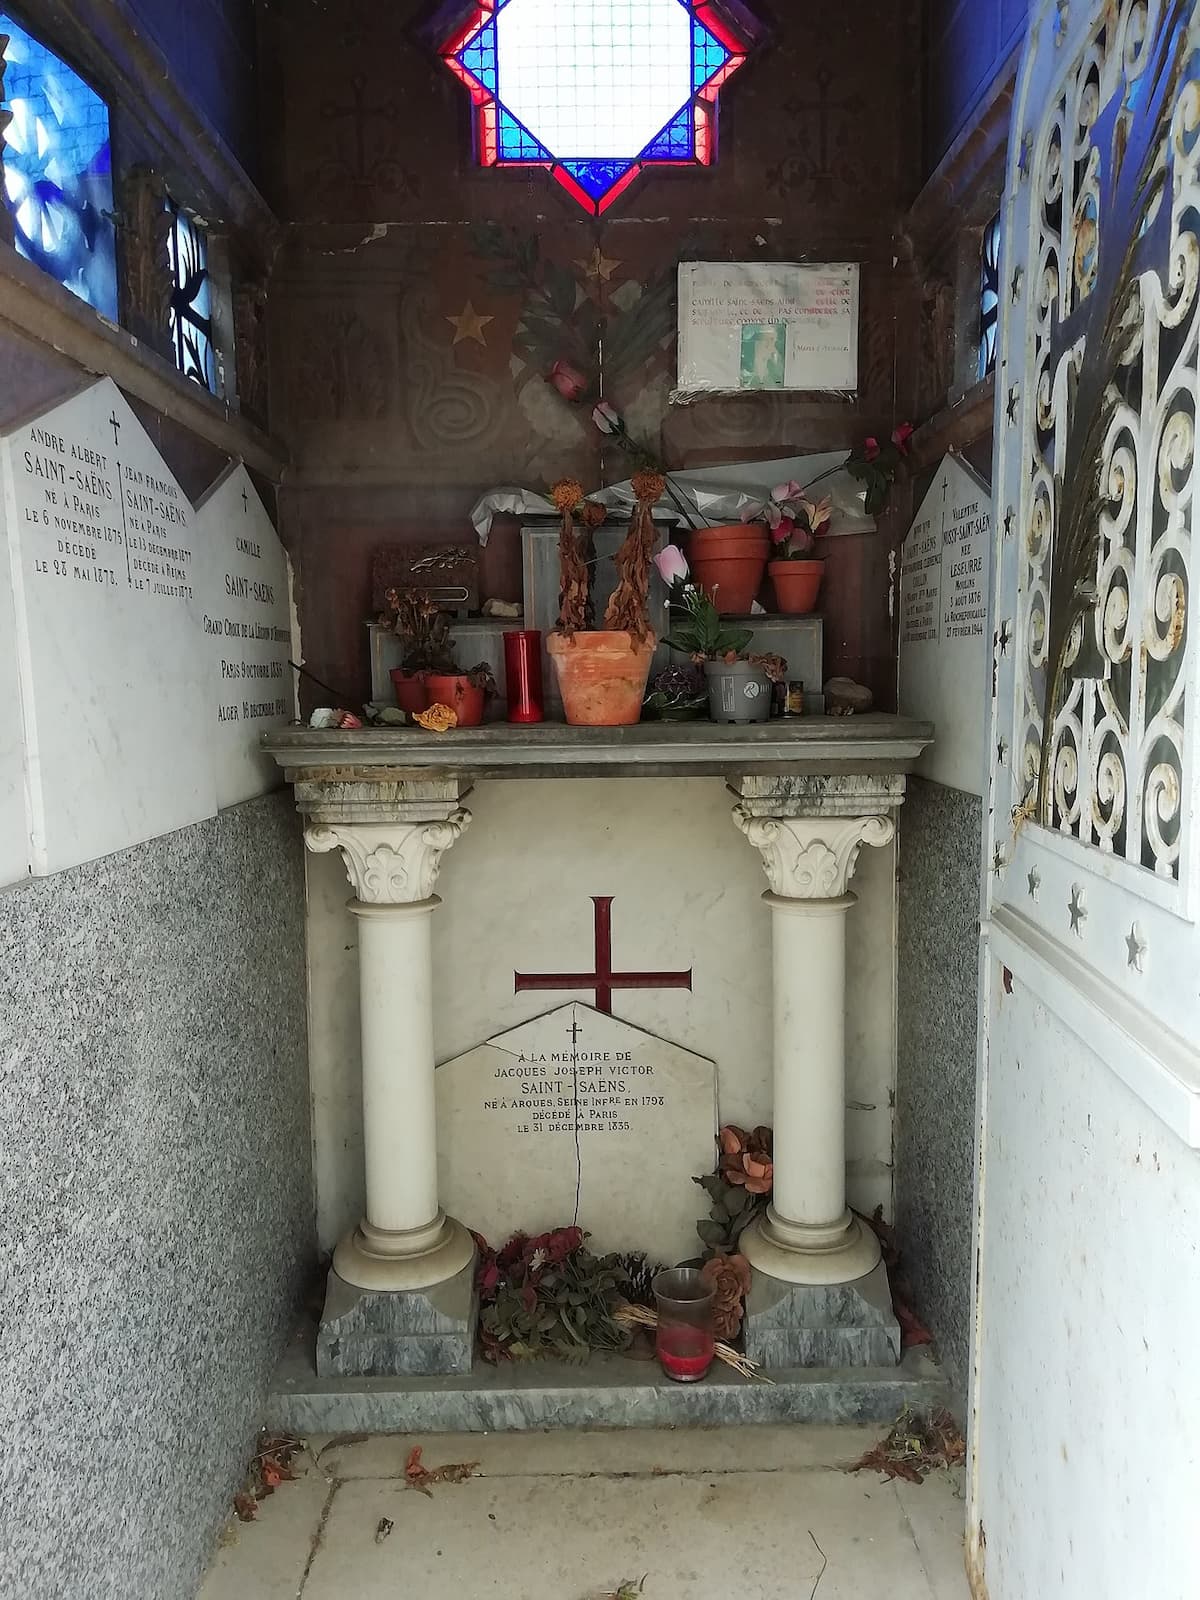 Tomb of Camille Saint-Saëns at the Montparnasse Cemetery